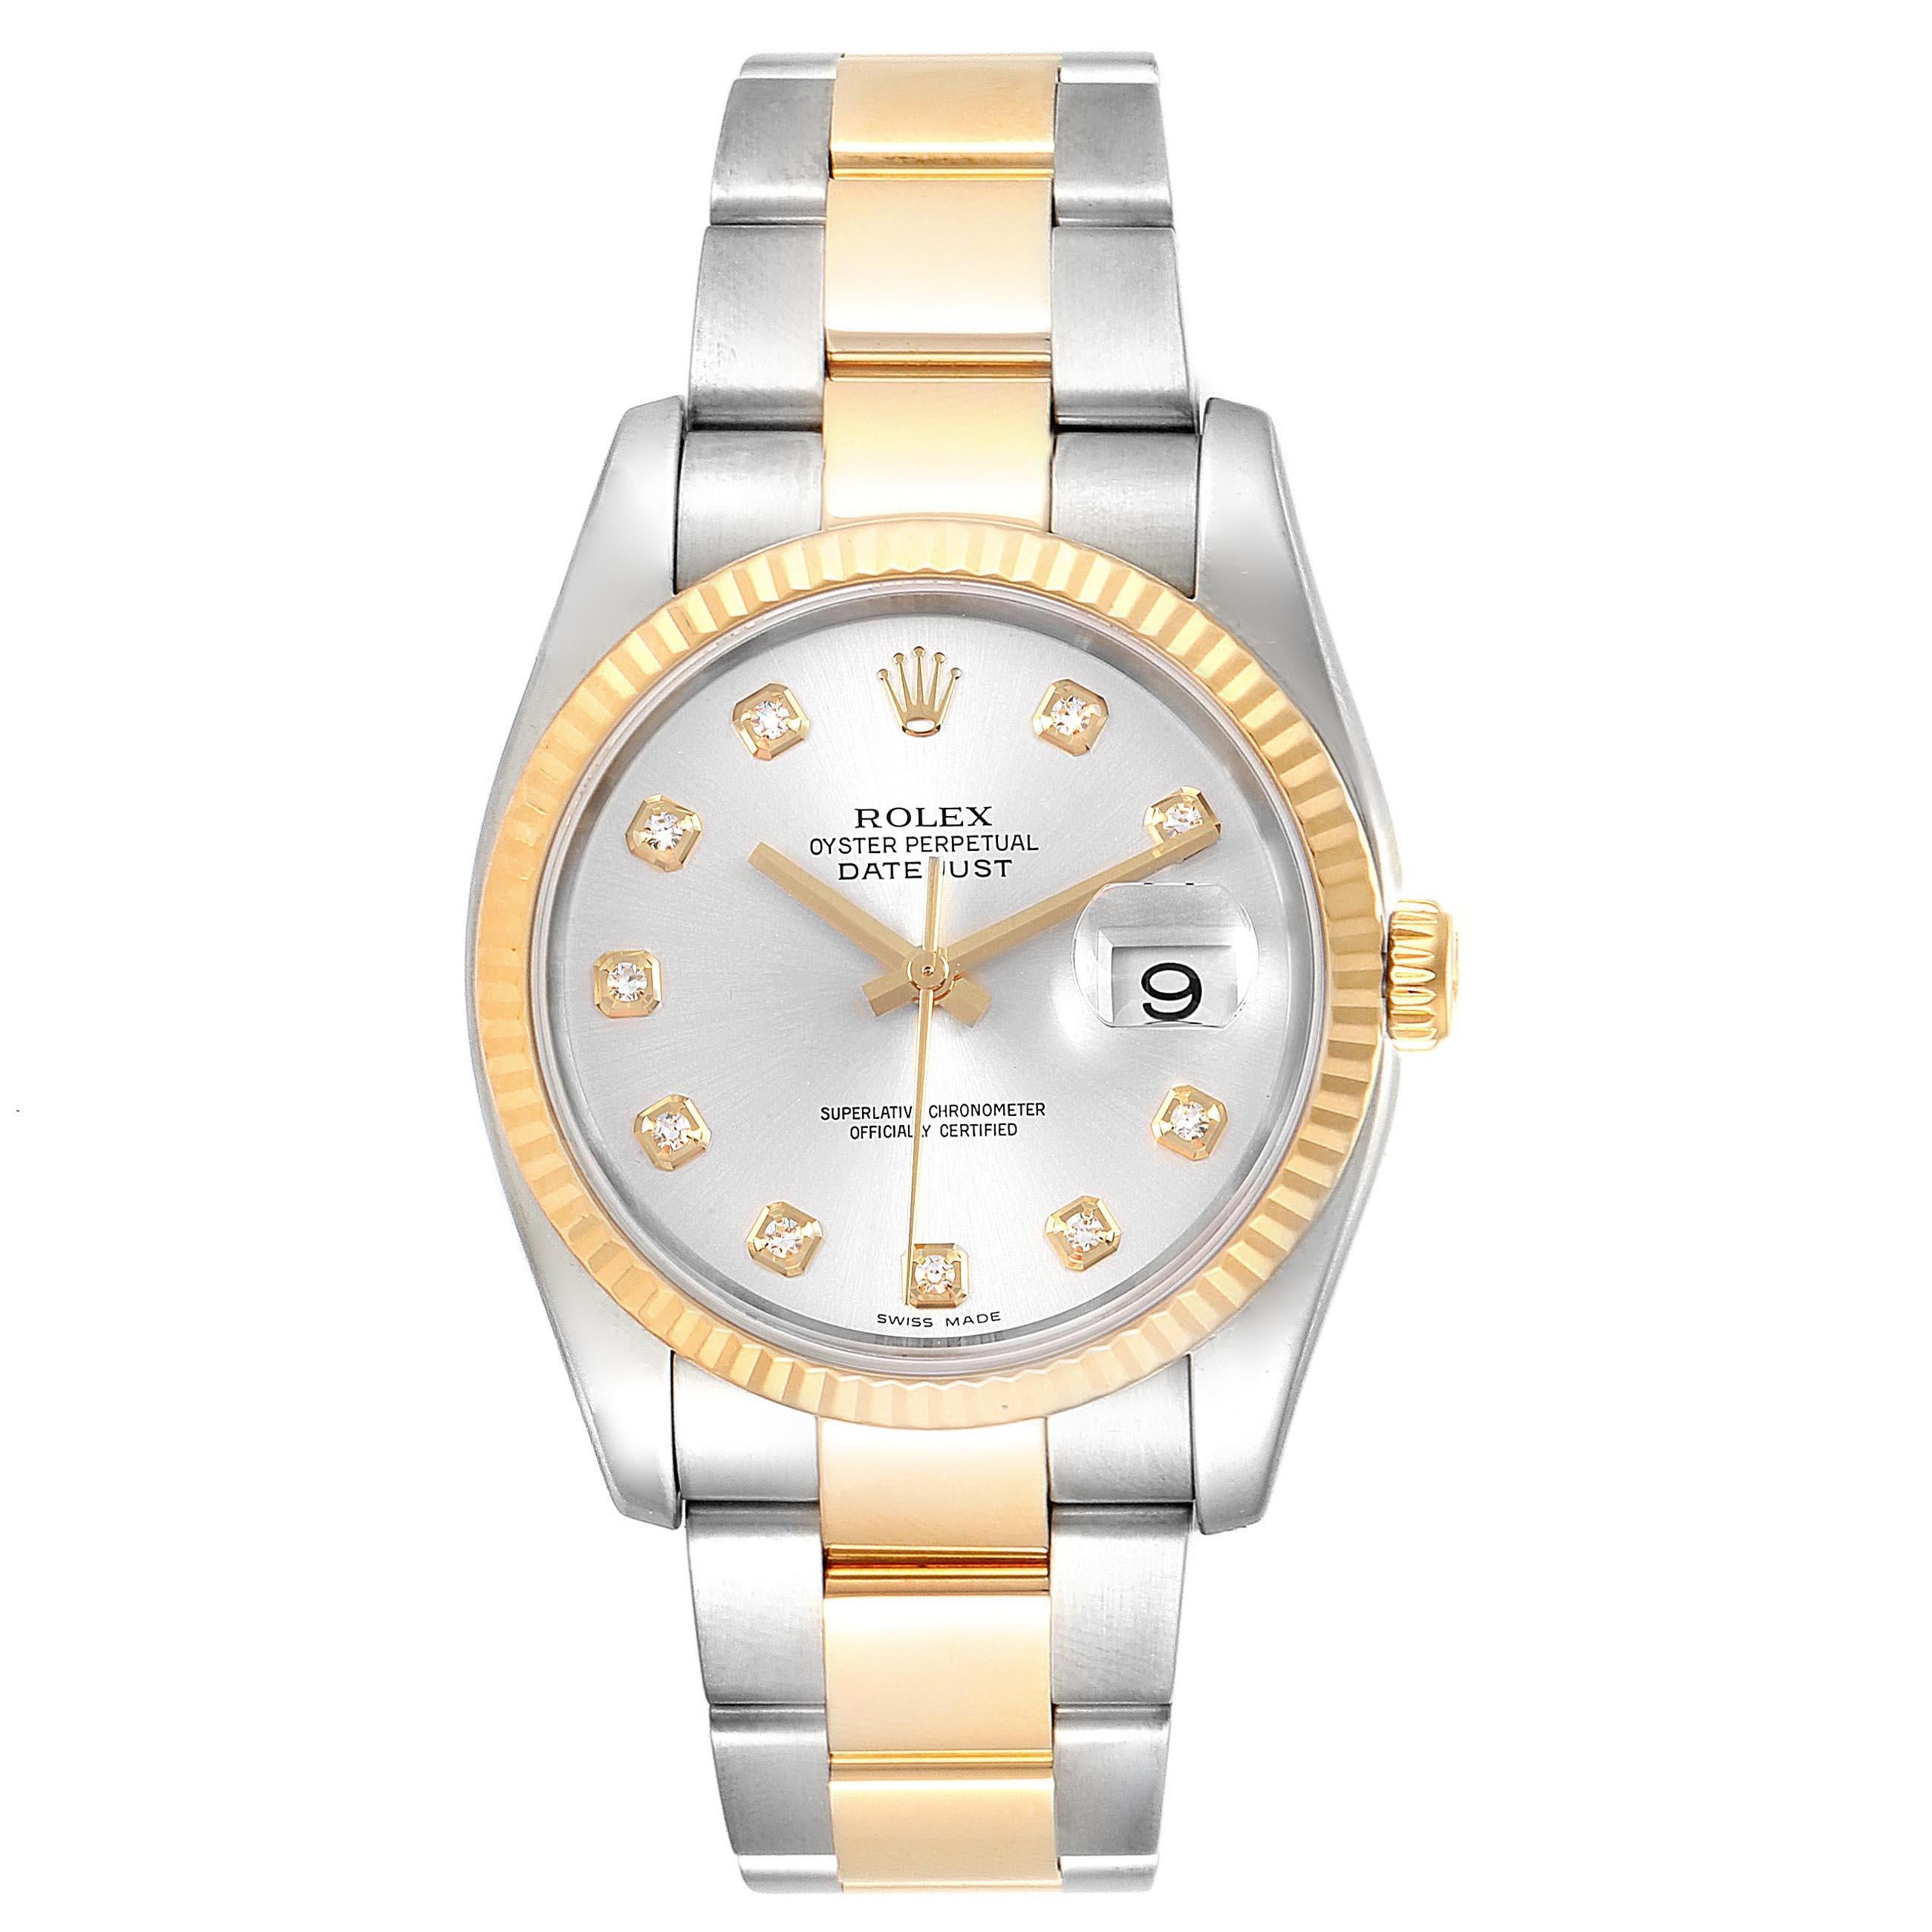 Rolex Datejust Steel Yellow Gold Silver Diamond Dial Mens Watch 116233. Officially certified chronometer self-winding movement. Stainless steel case 36 mm in diameter.  Rolex logo on a crown. 18k yellow gold fluted bezel. Scratch resistant sapphire